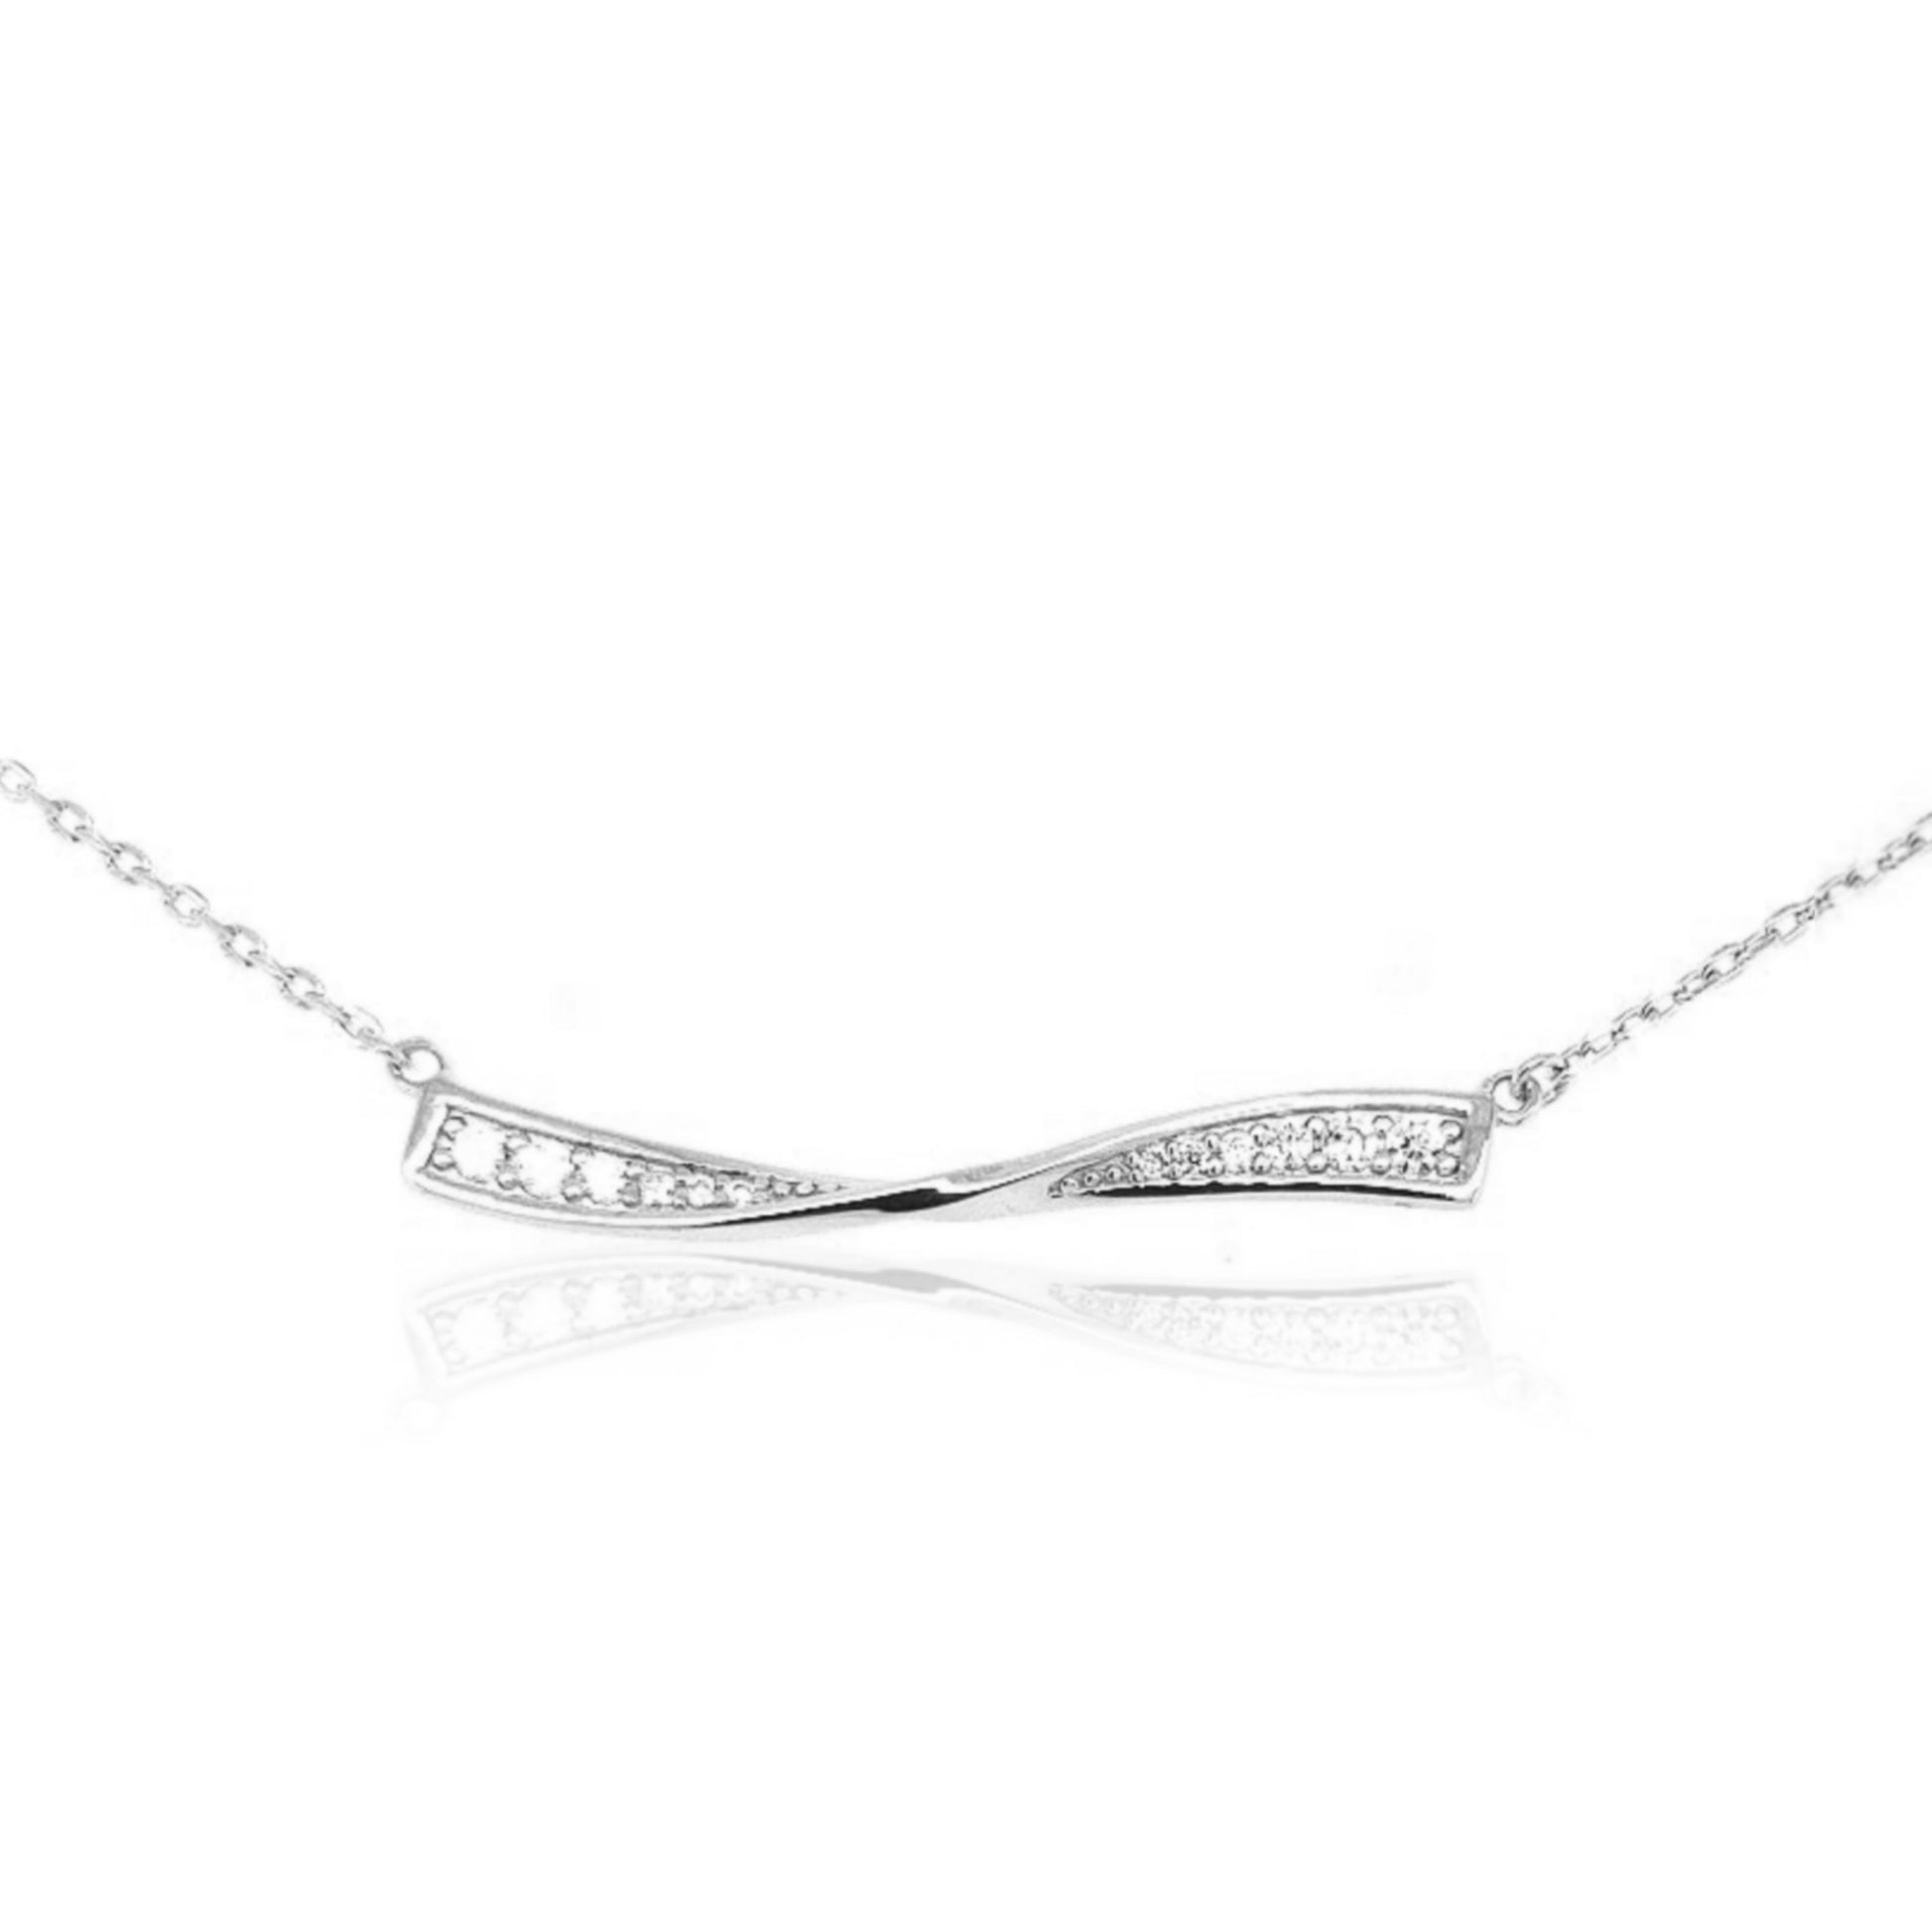 Sterling Silver Twisted Bar Necklace - HK Jewels